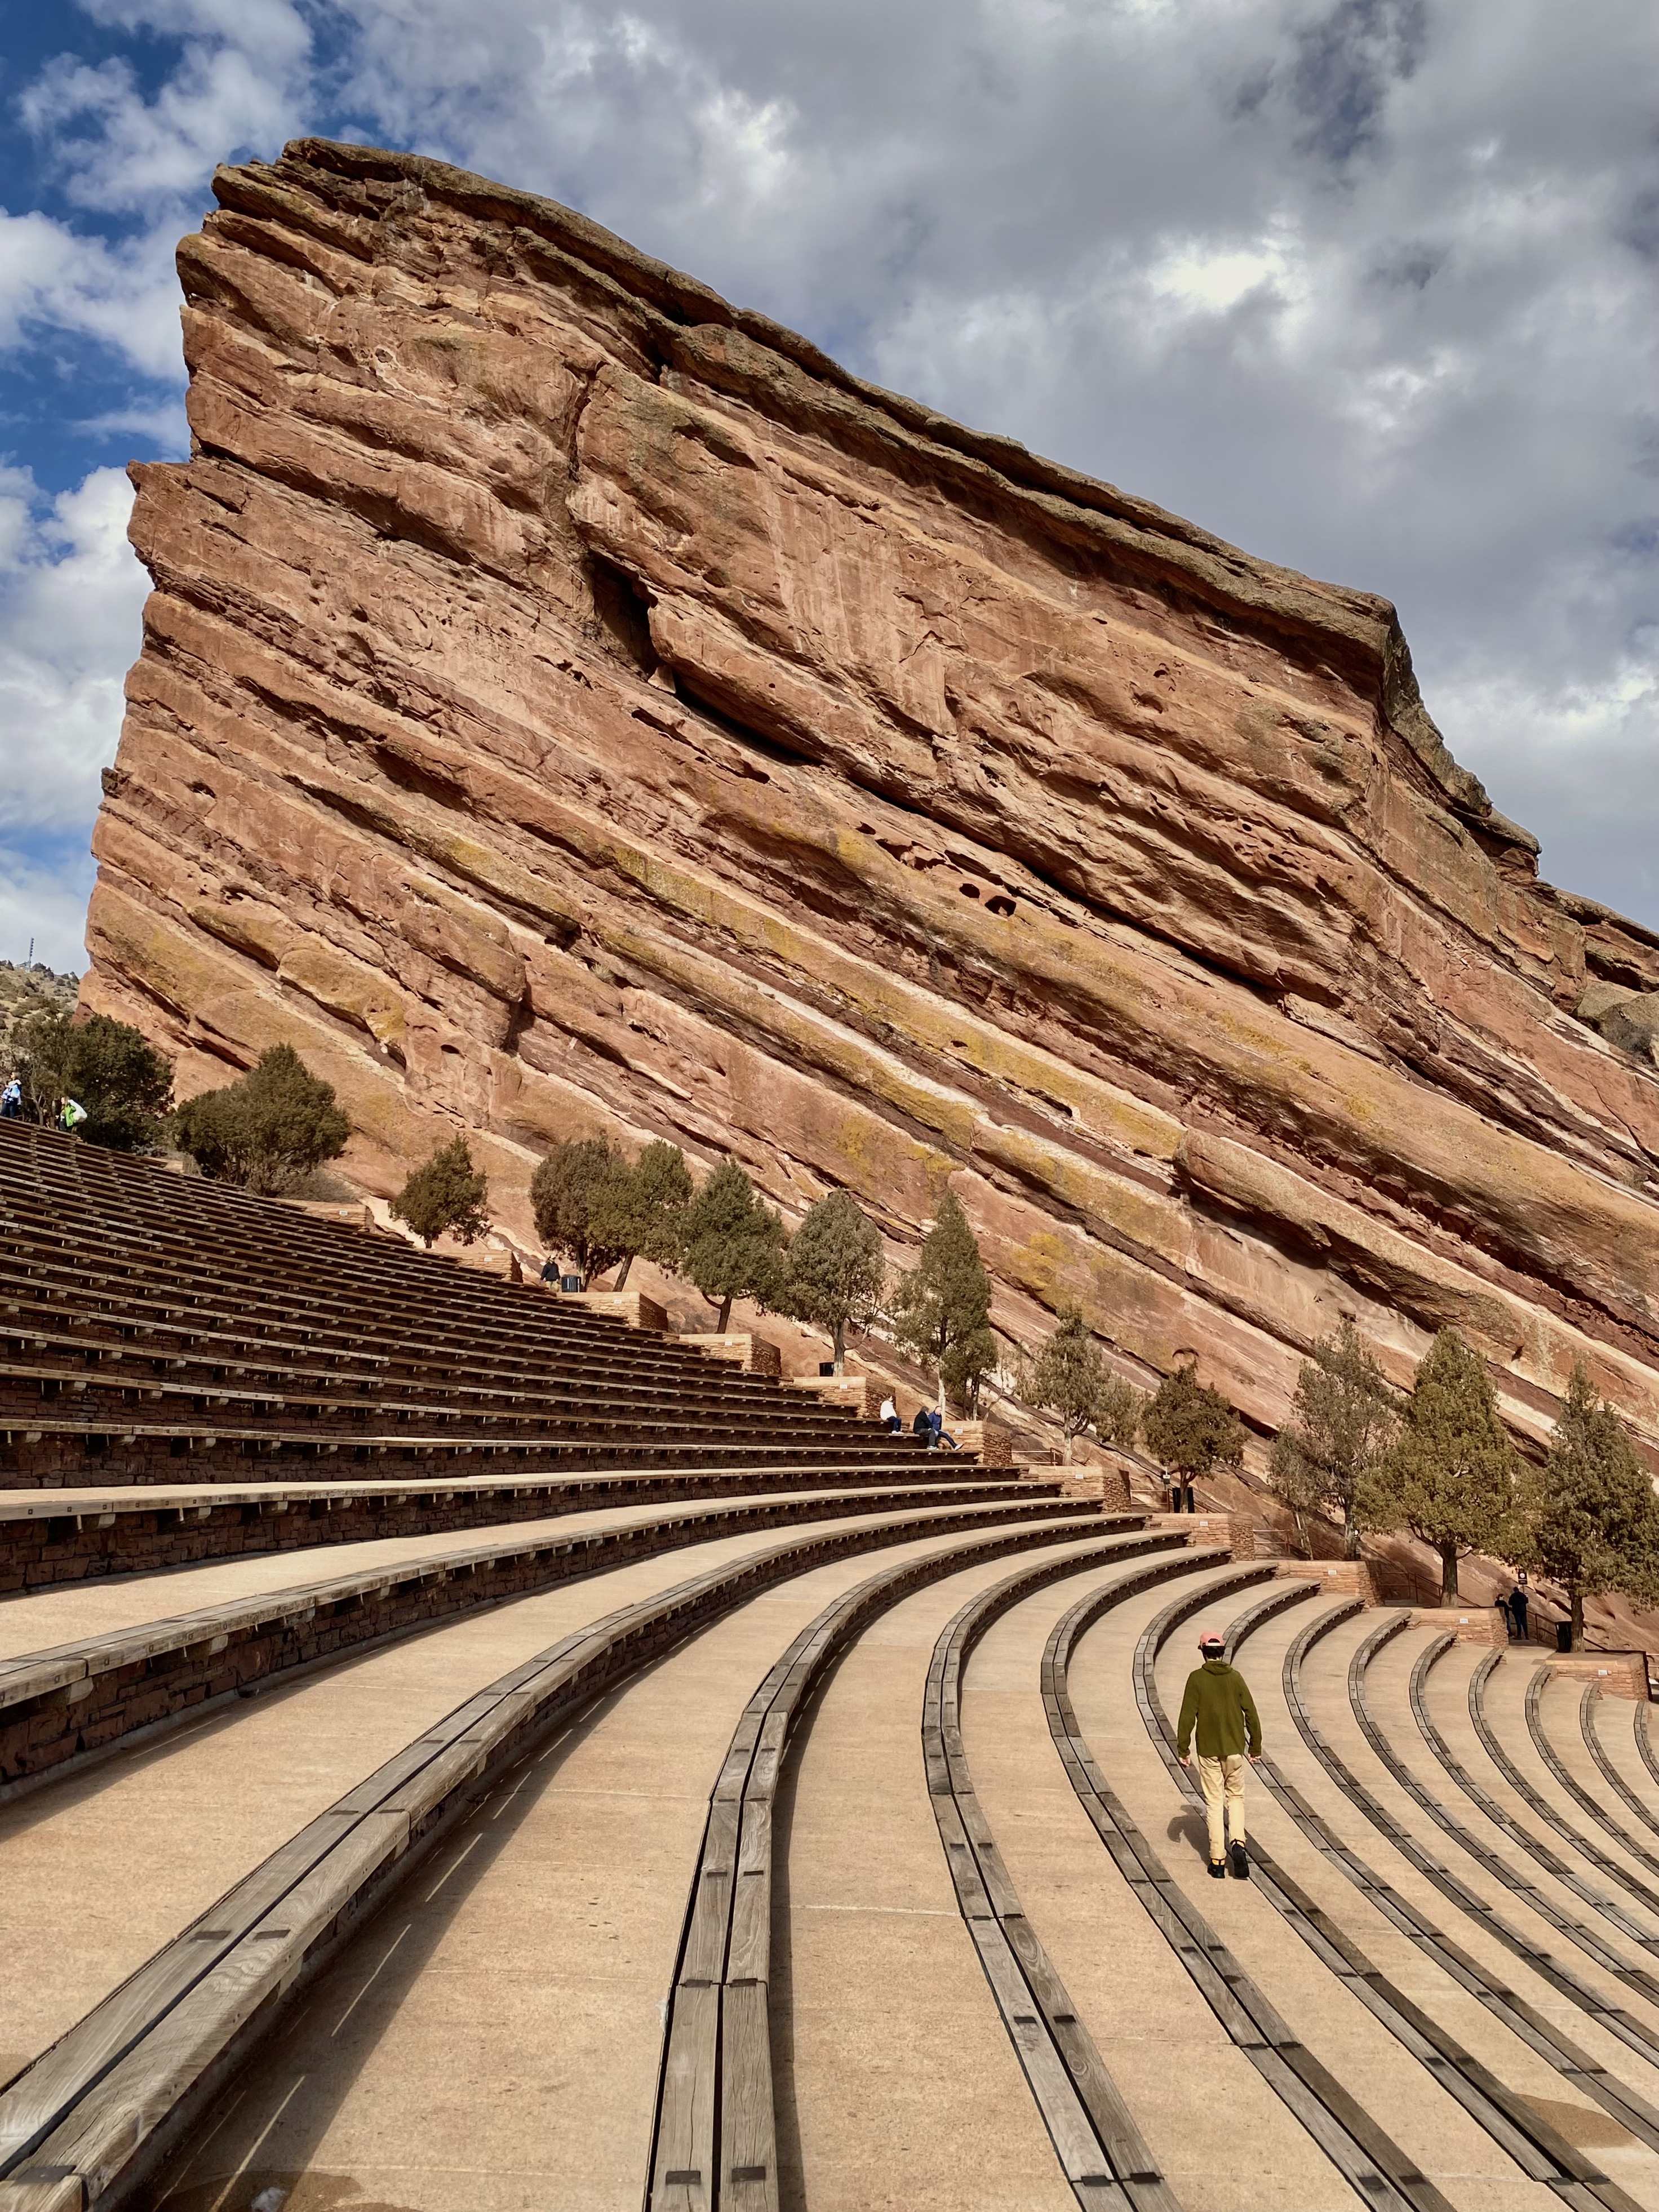 Towering red rock face with amphitheater seating and jonathan, in green sweater and tan pants, walking across them. 10 beautiful spots to visit in colorado (no hiking required)